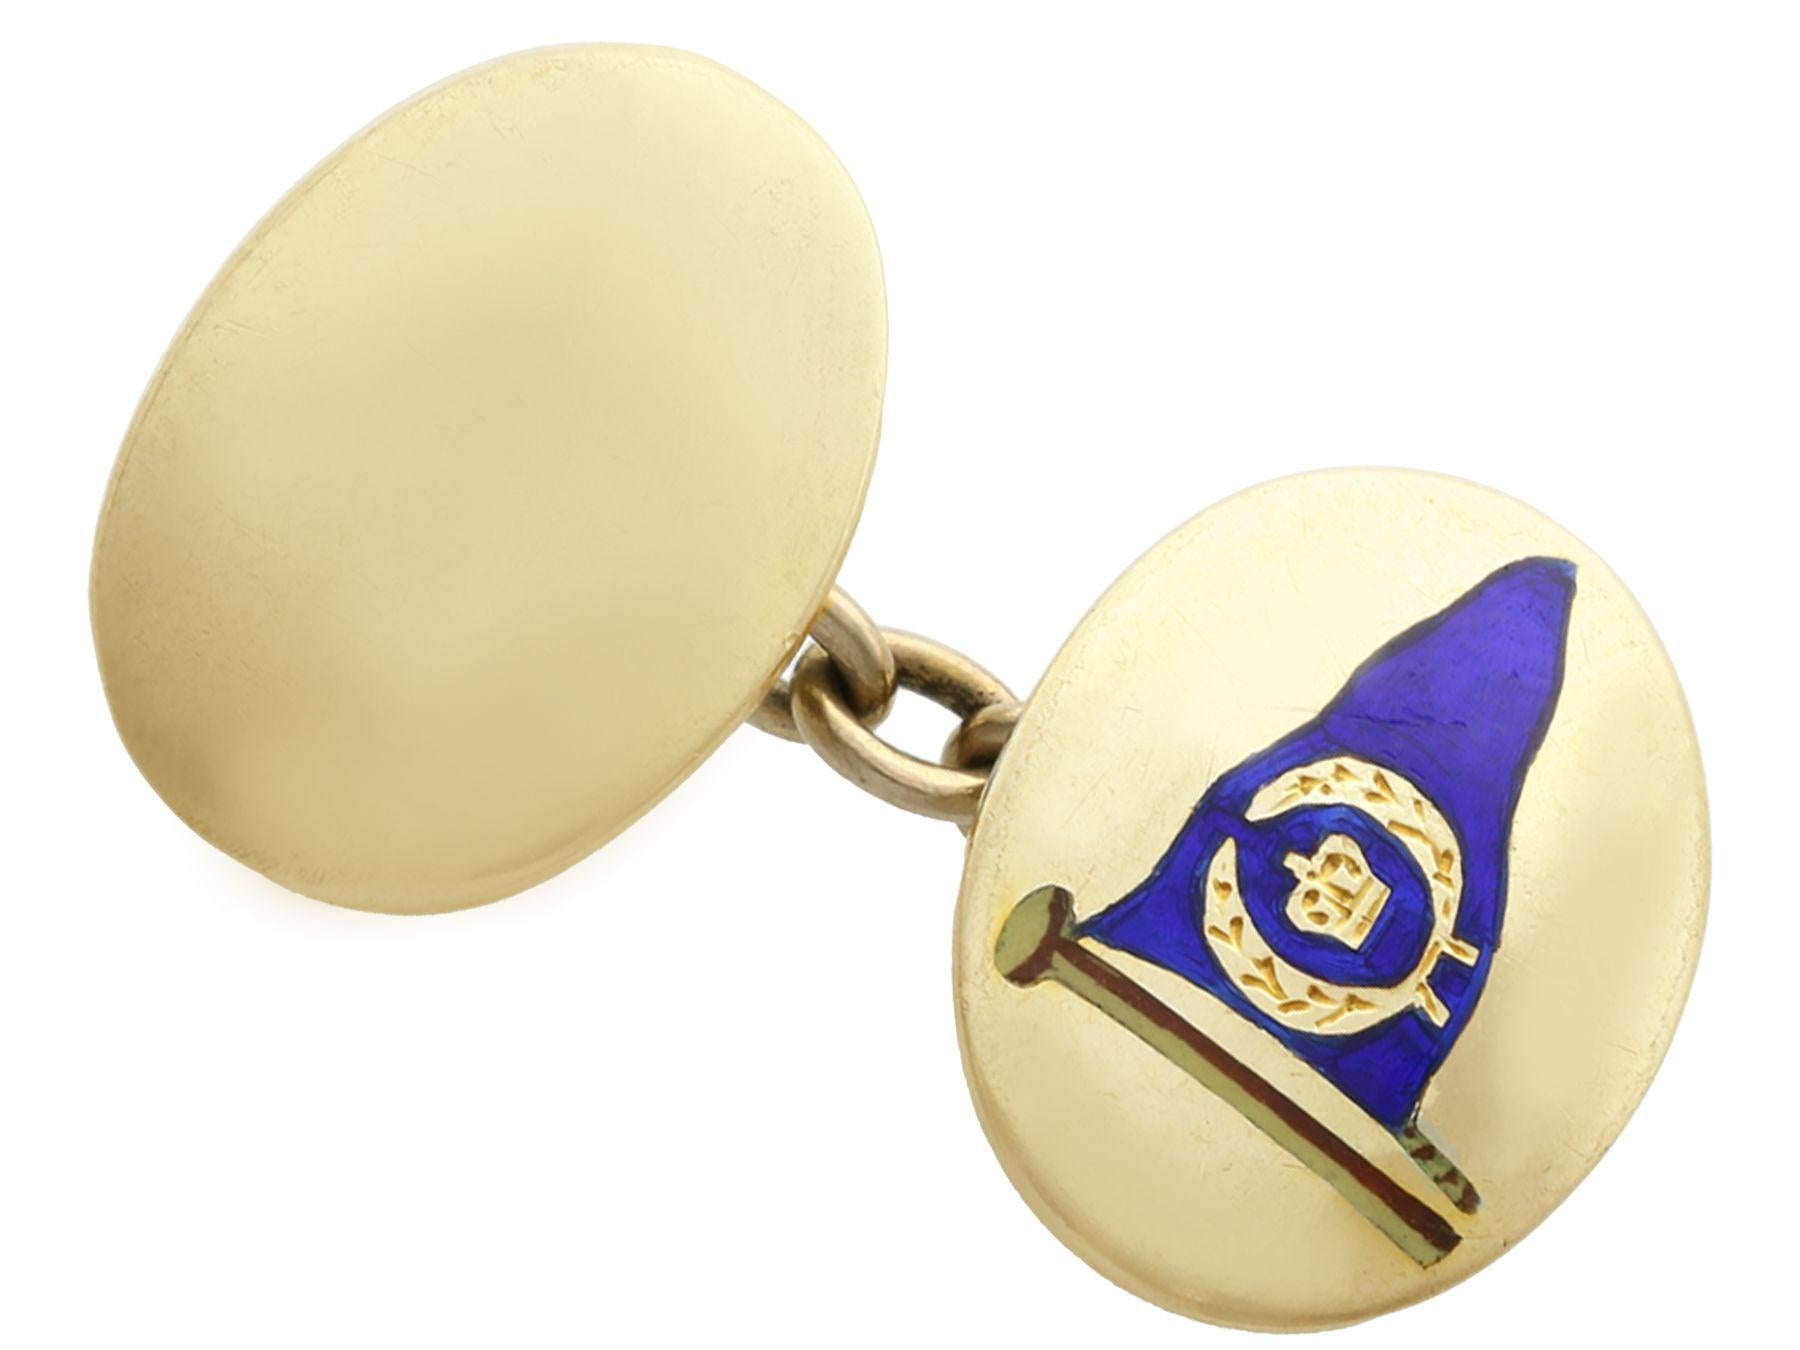 A fine and impressive pair of 9 carat yellow gold cufflinks with enamel decoration; part of our diverse vintage jewelry and estate jewelry collections,

These fine and impressive vintage gold cufflinks have been crafted in 9 ct yellow gold.

The